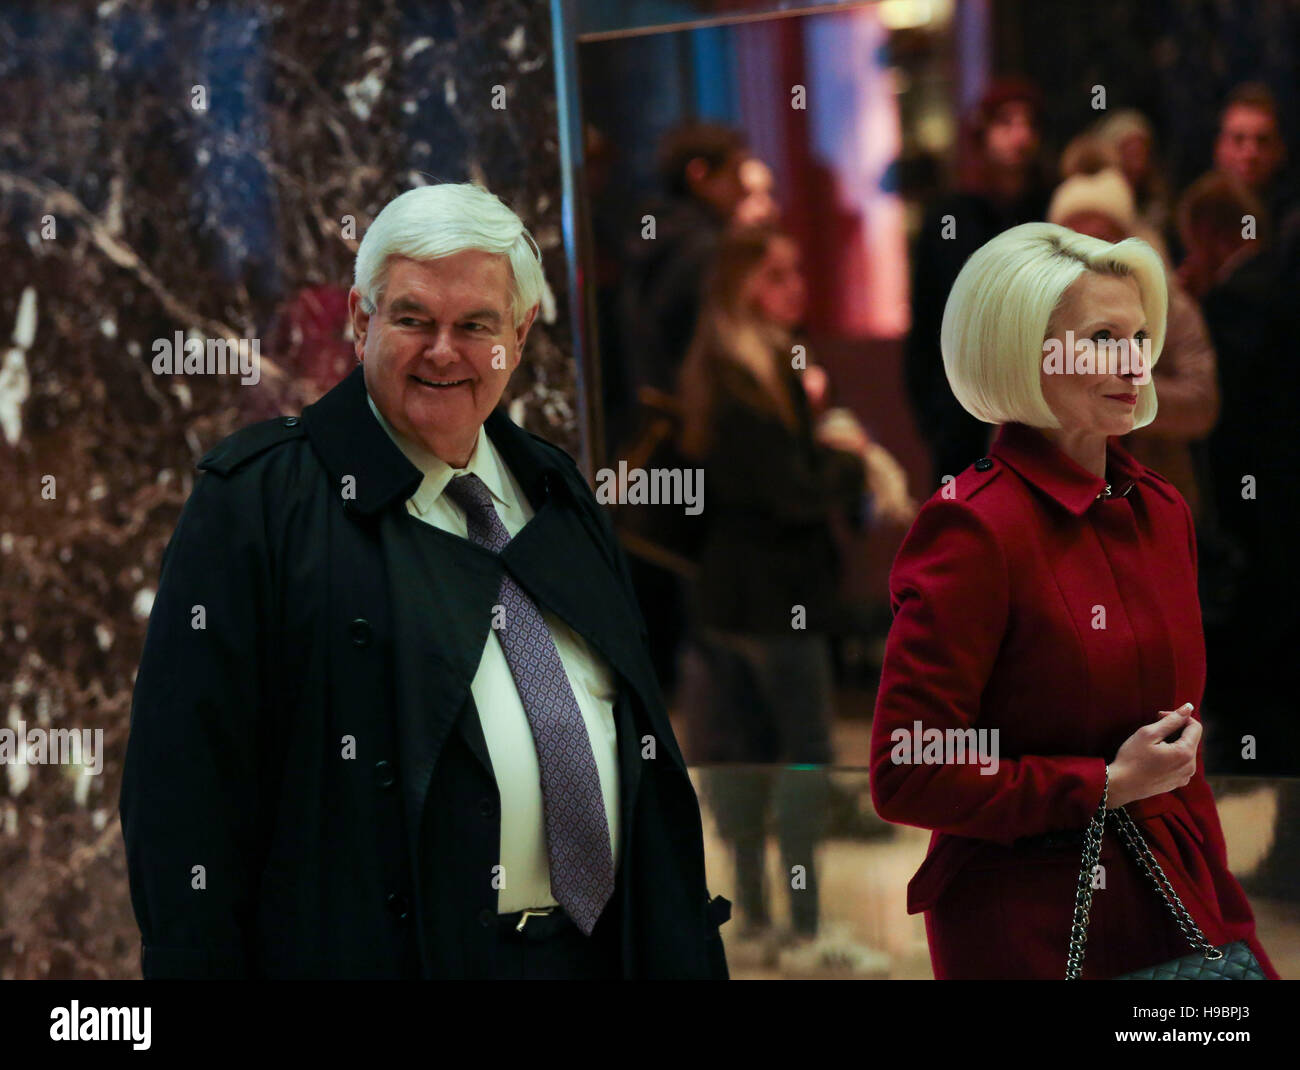 New York, USA. 21st Nov, 2016. Former Speaker of the United States House of Representatives Newt Gingrich (Republican of Georgia) arrives with his wife, Callista, for a meeting with US President-elect Donald Trump, in the Trump Tower, November 21, 2016, in New York, USA.  Photo: Aude Guerrucci/Consolidated/dpa/Alamy Live News Stock Photo